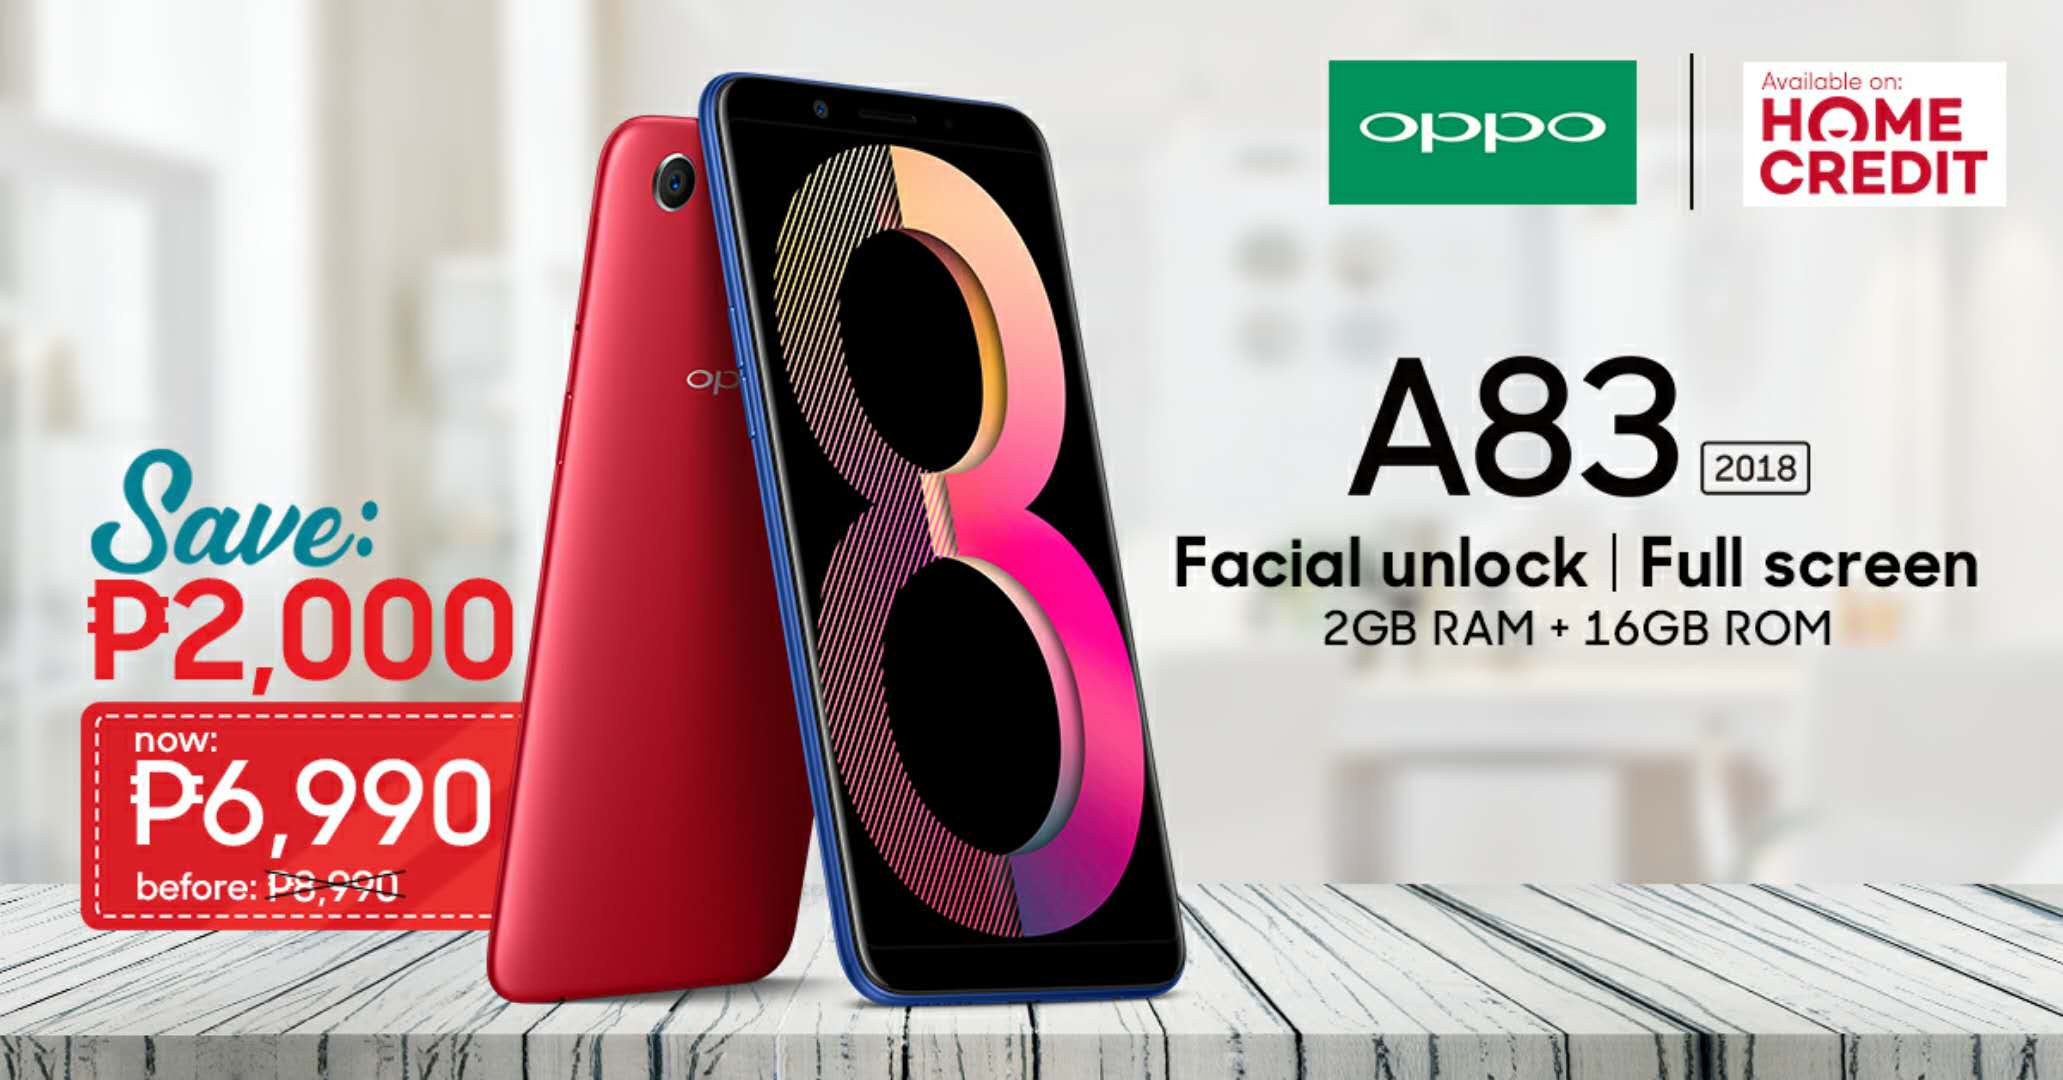 OPPO A83 now more competitive at PHP 6,990